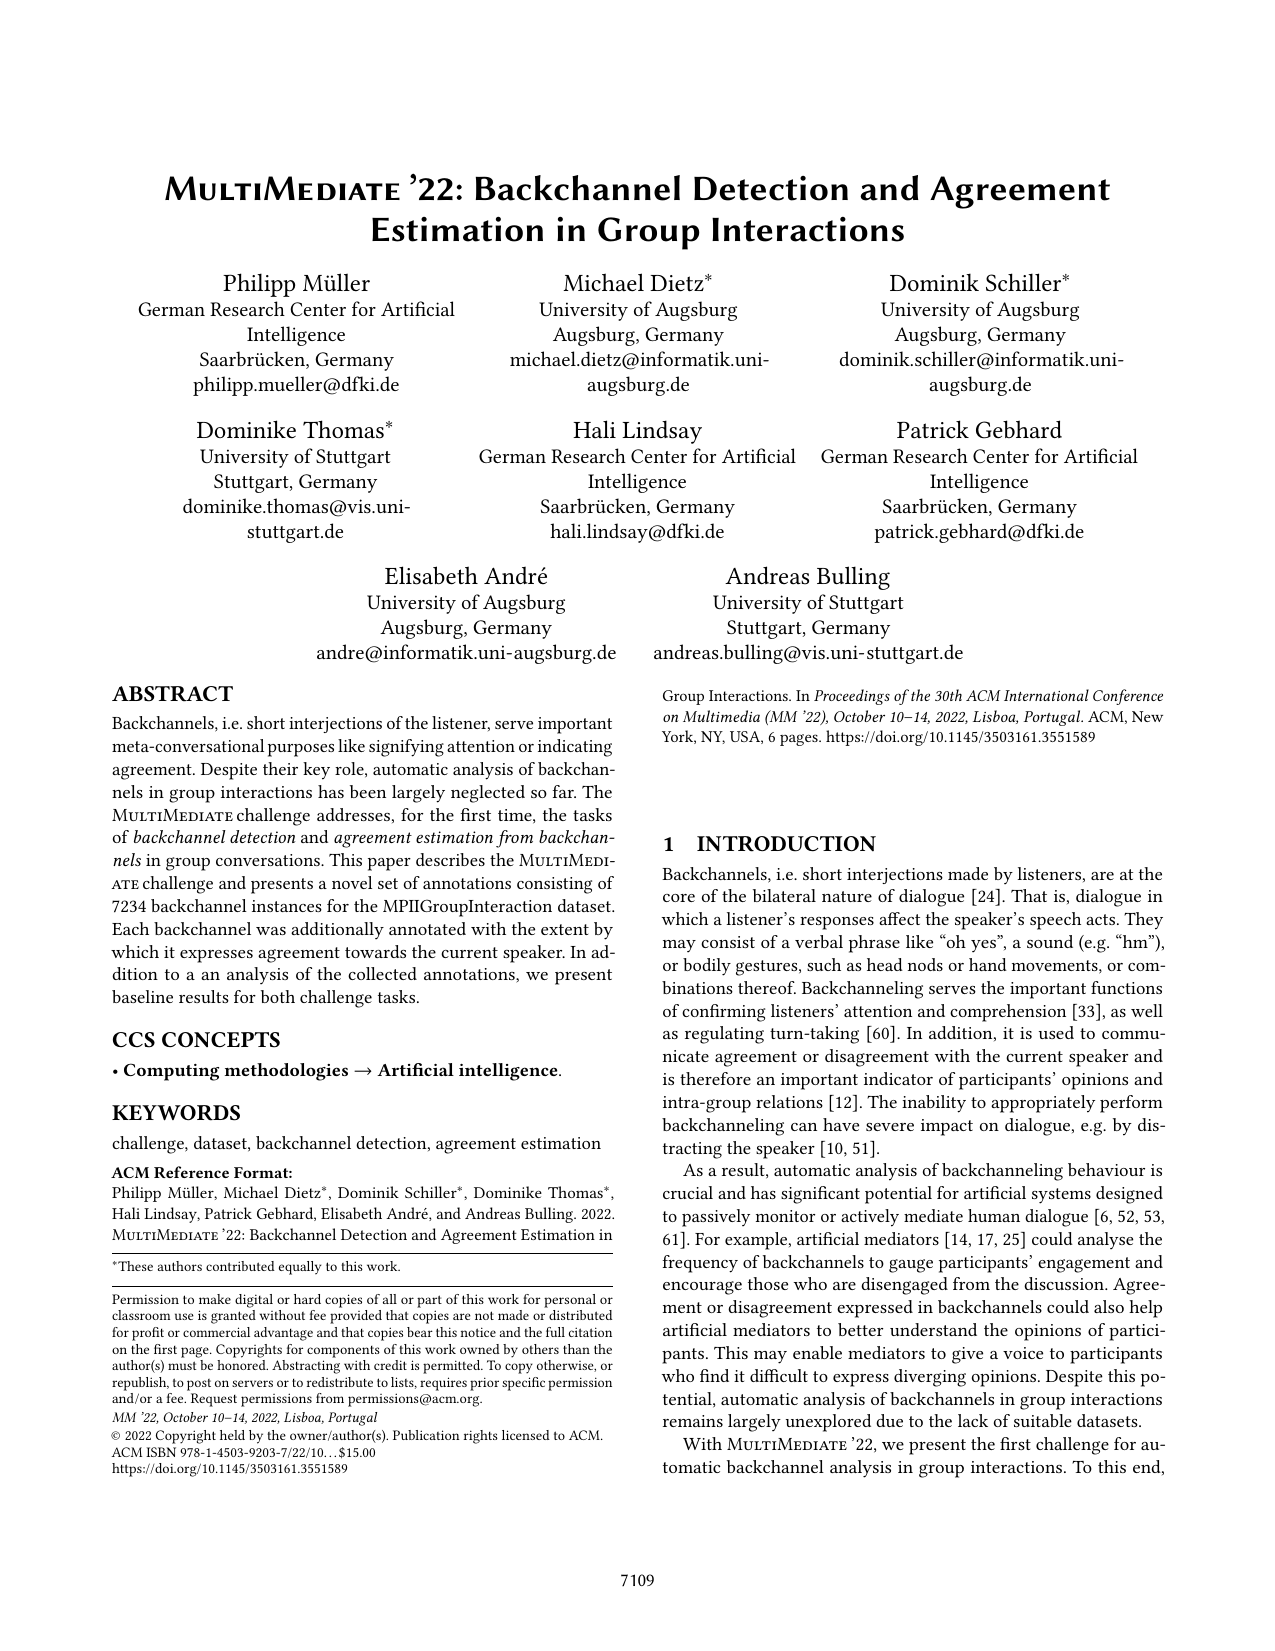 MultiMediate’22: Backchannel Detection and Agreement Estimation in Group Interactions